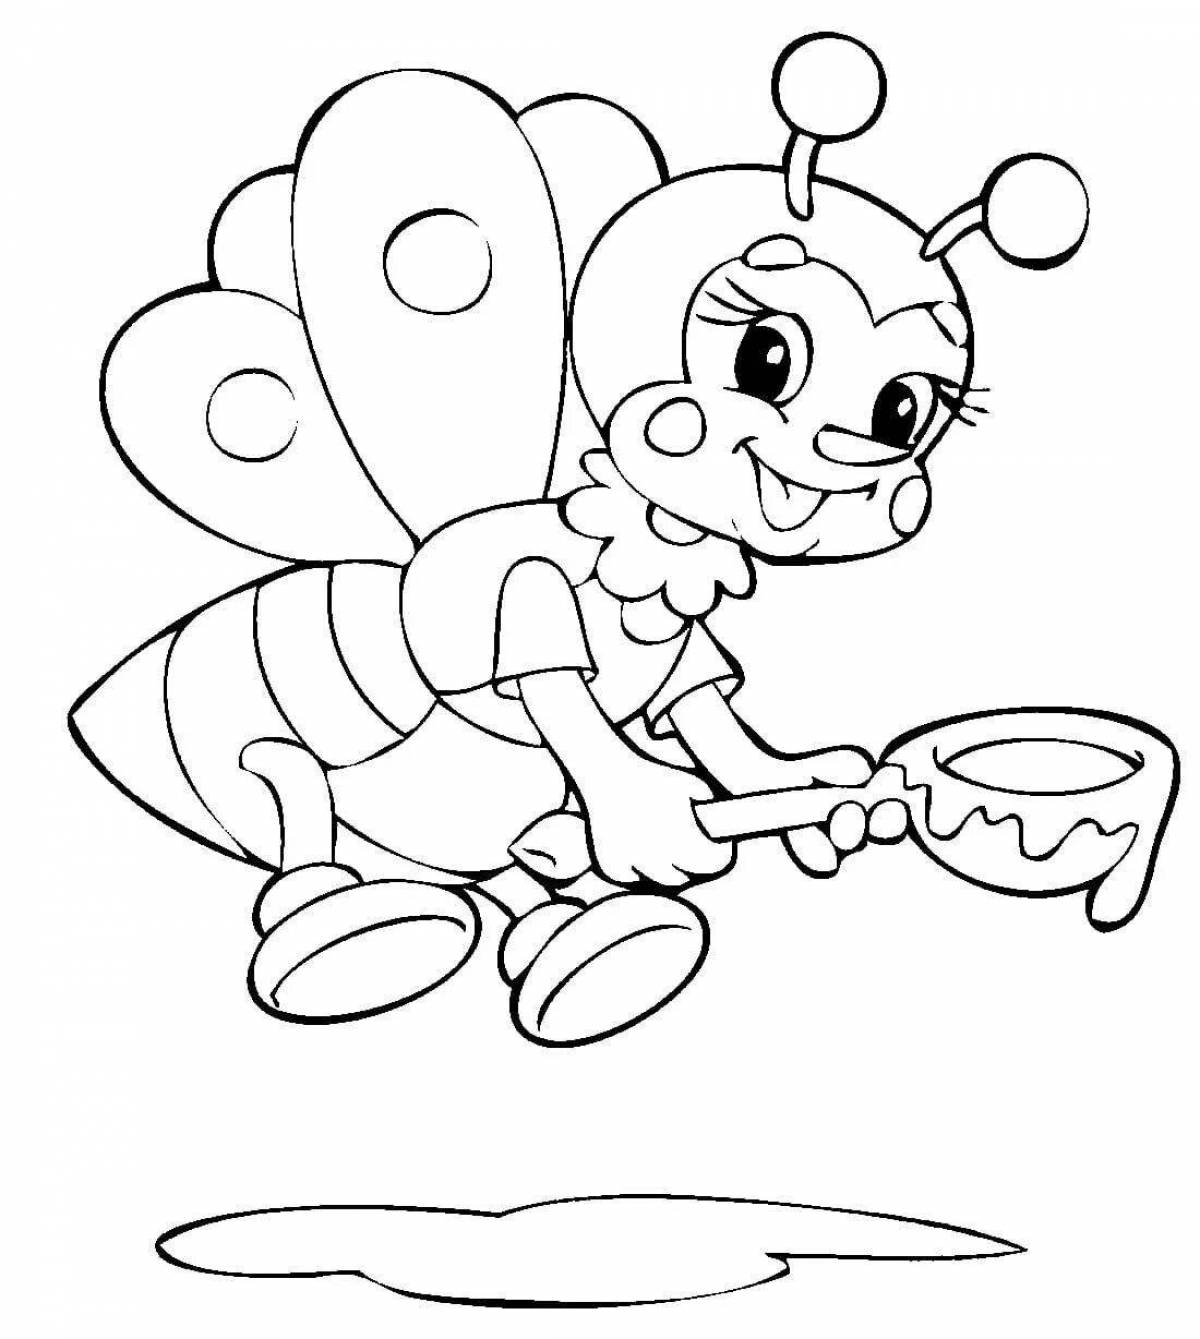 Color bee coloring page for 6-7 year olds